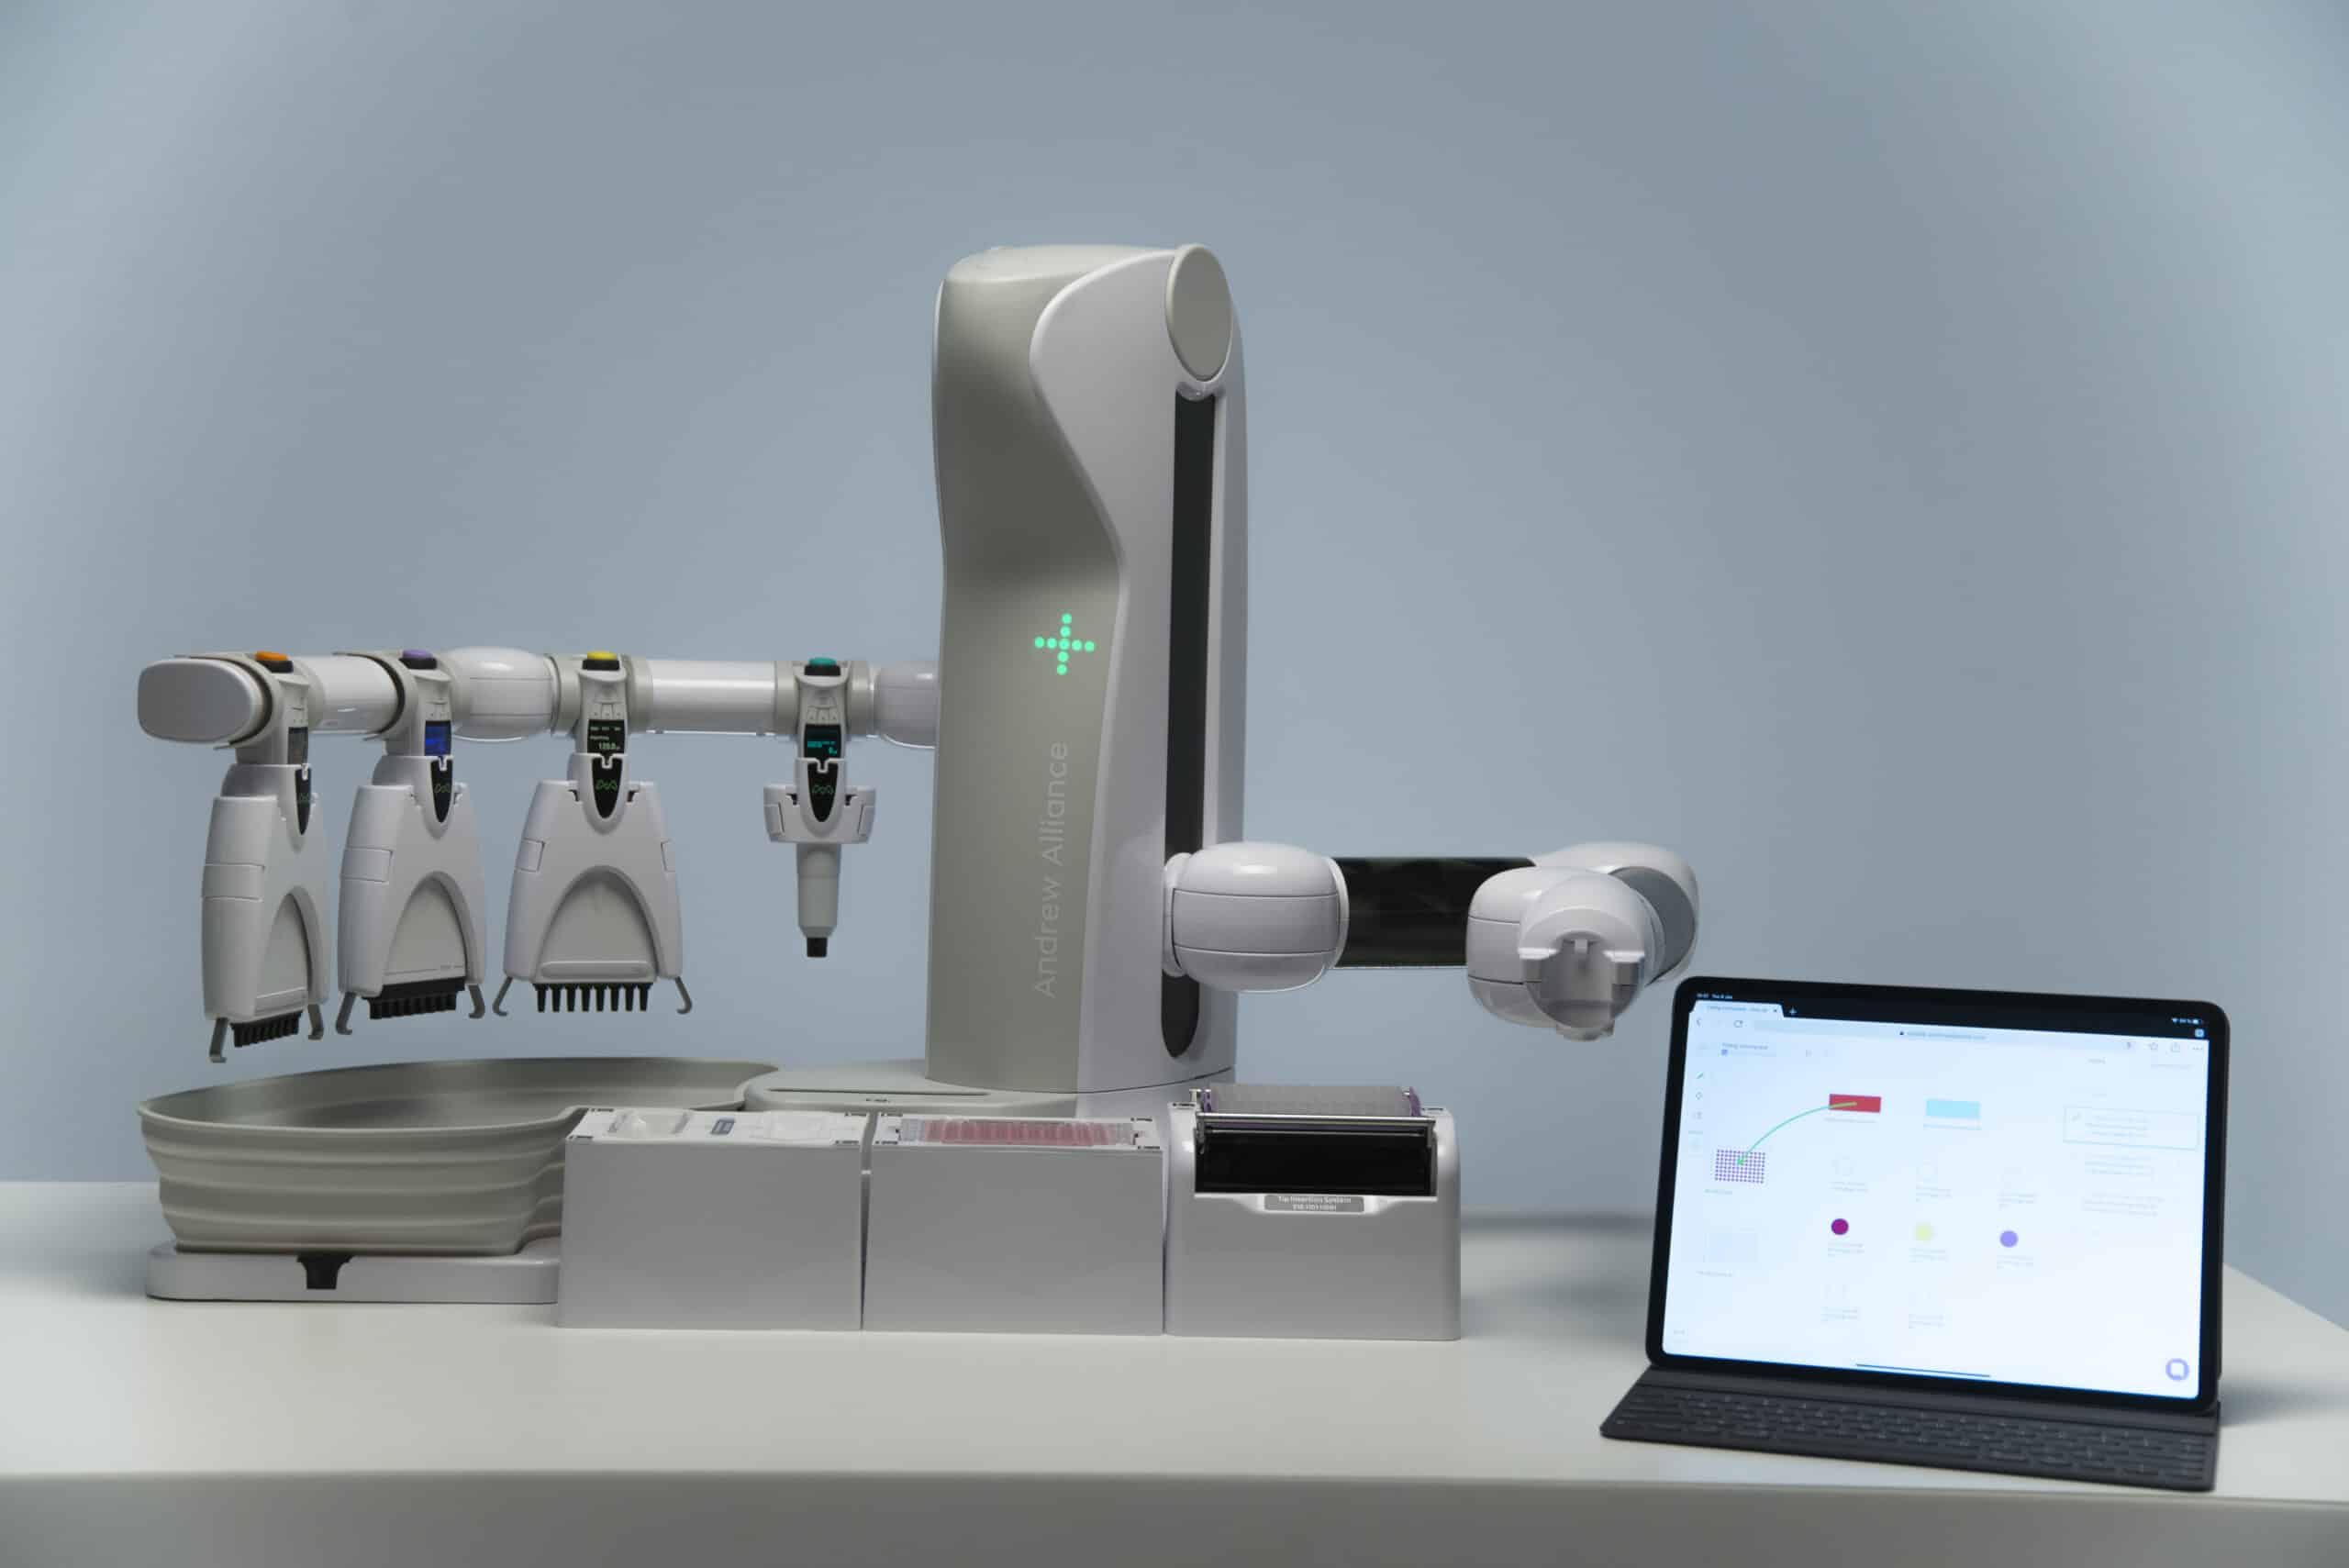 Andrew+ liquid handling robot executes protocols created in the OneLab cloud-native software for highly repeatable, fully trackable sample prep